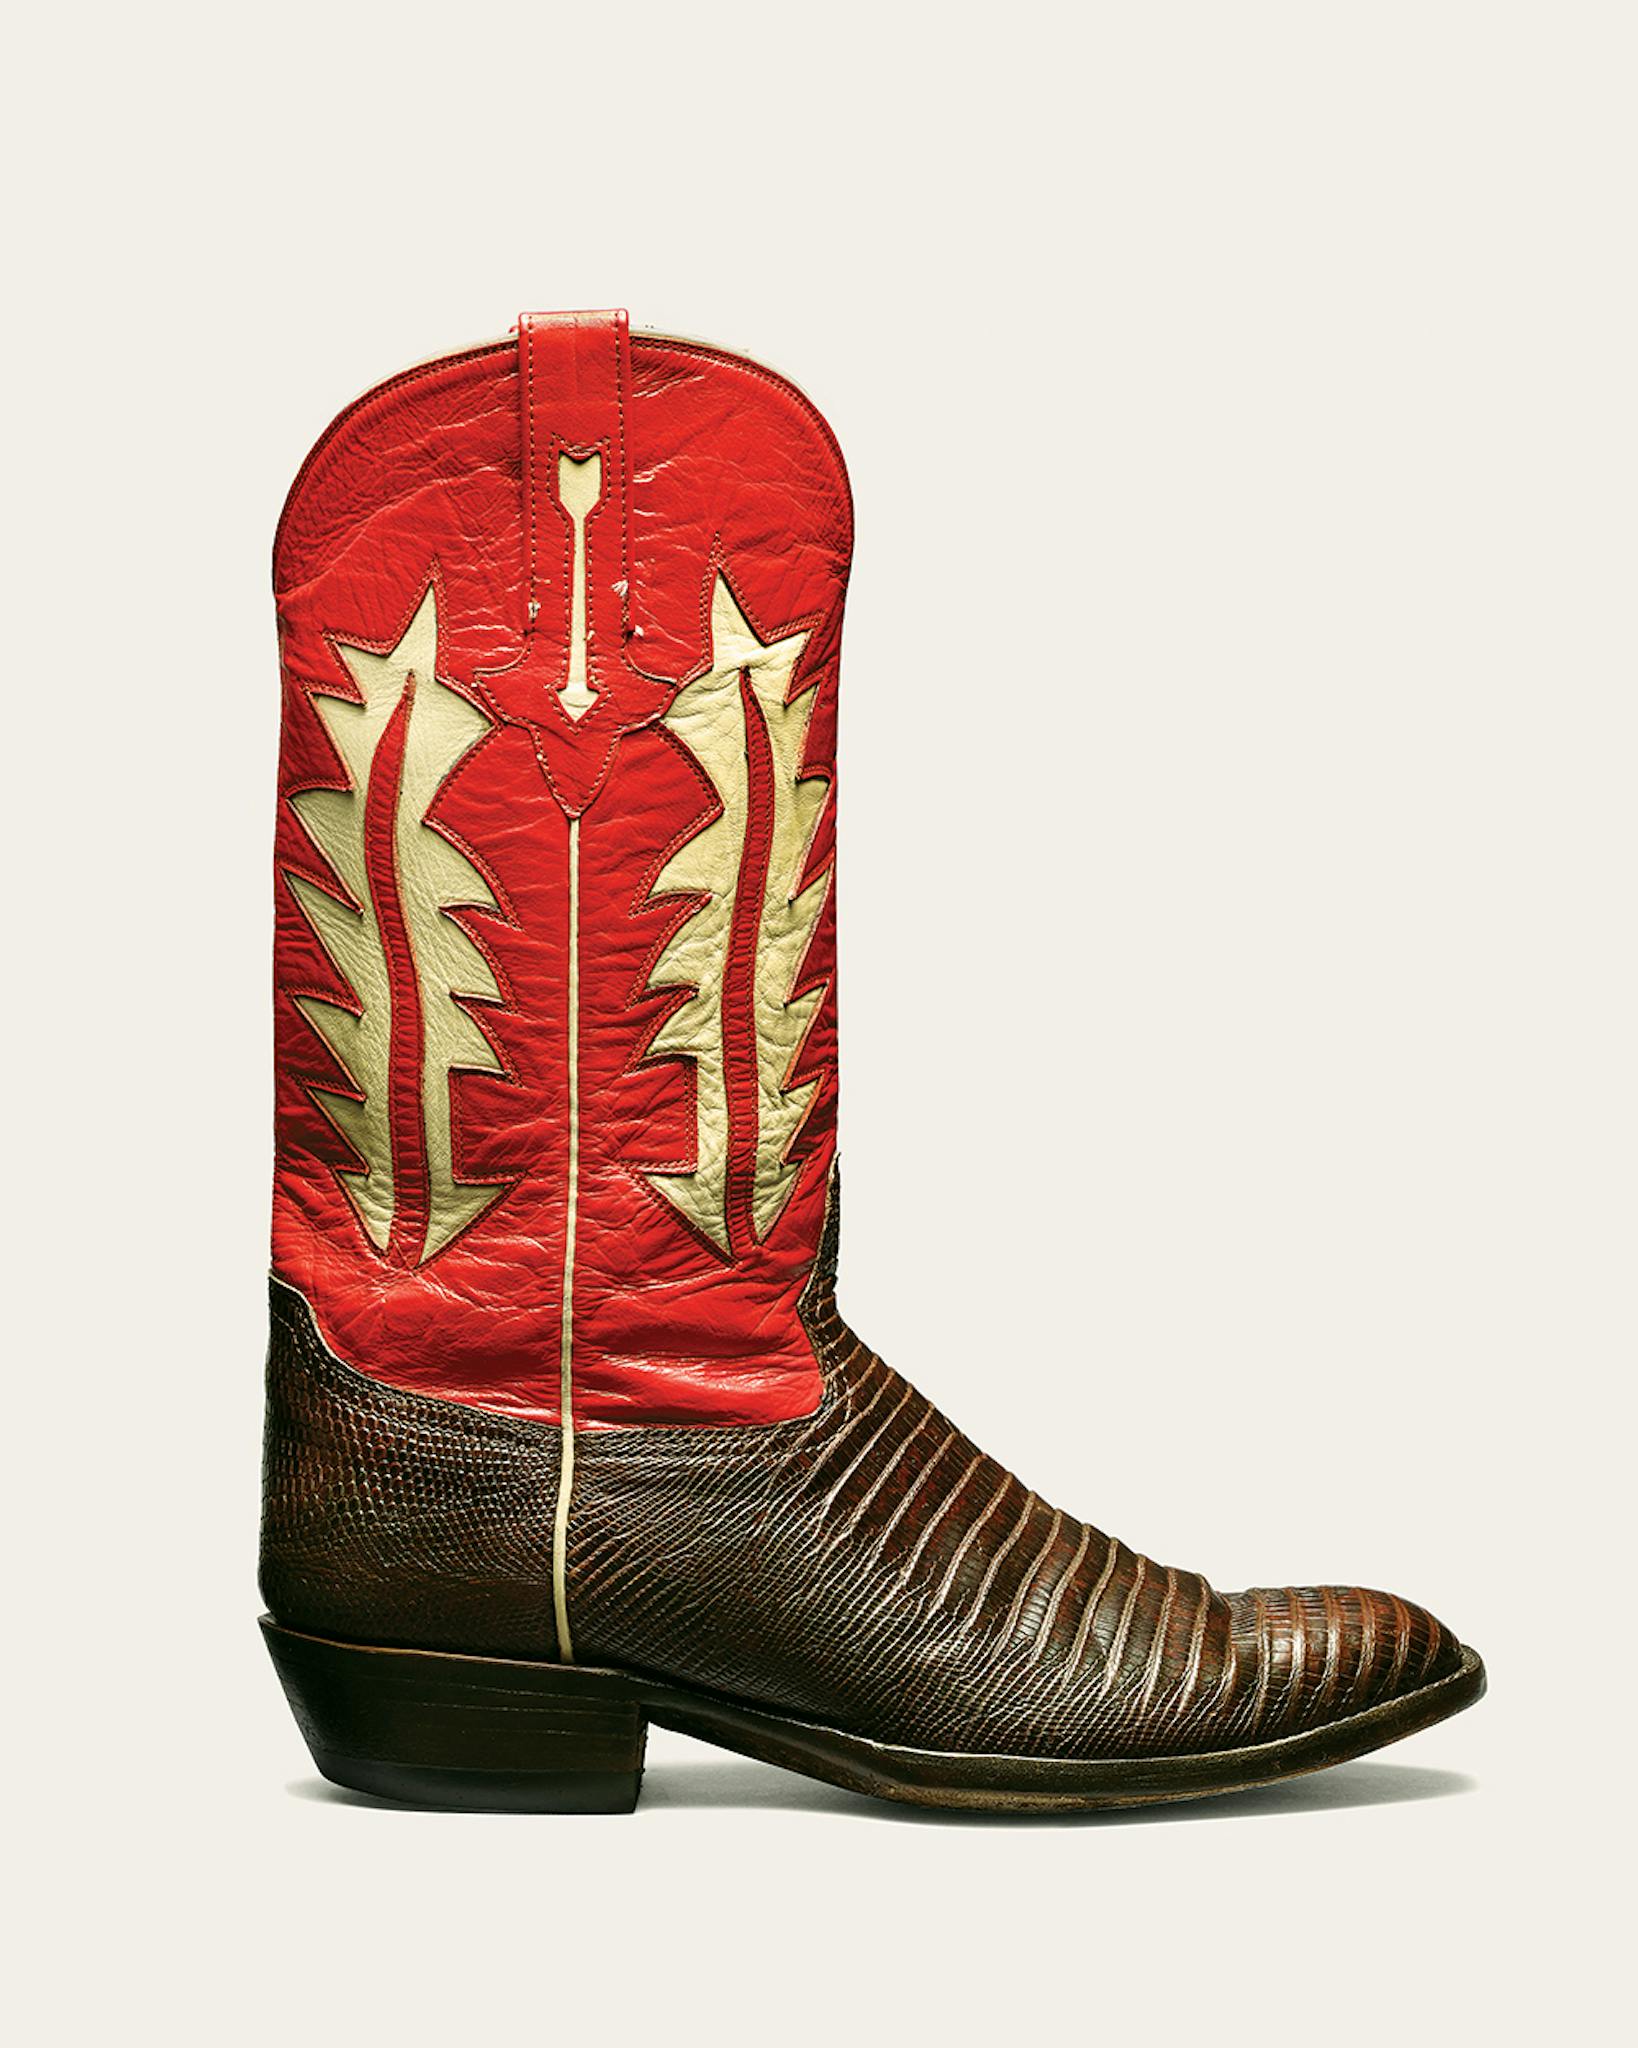 Mission Boot Company boot with red shaft and brown vamp.